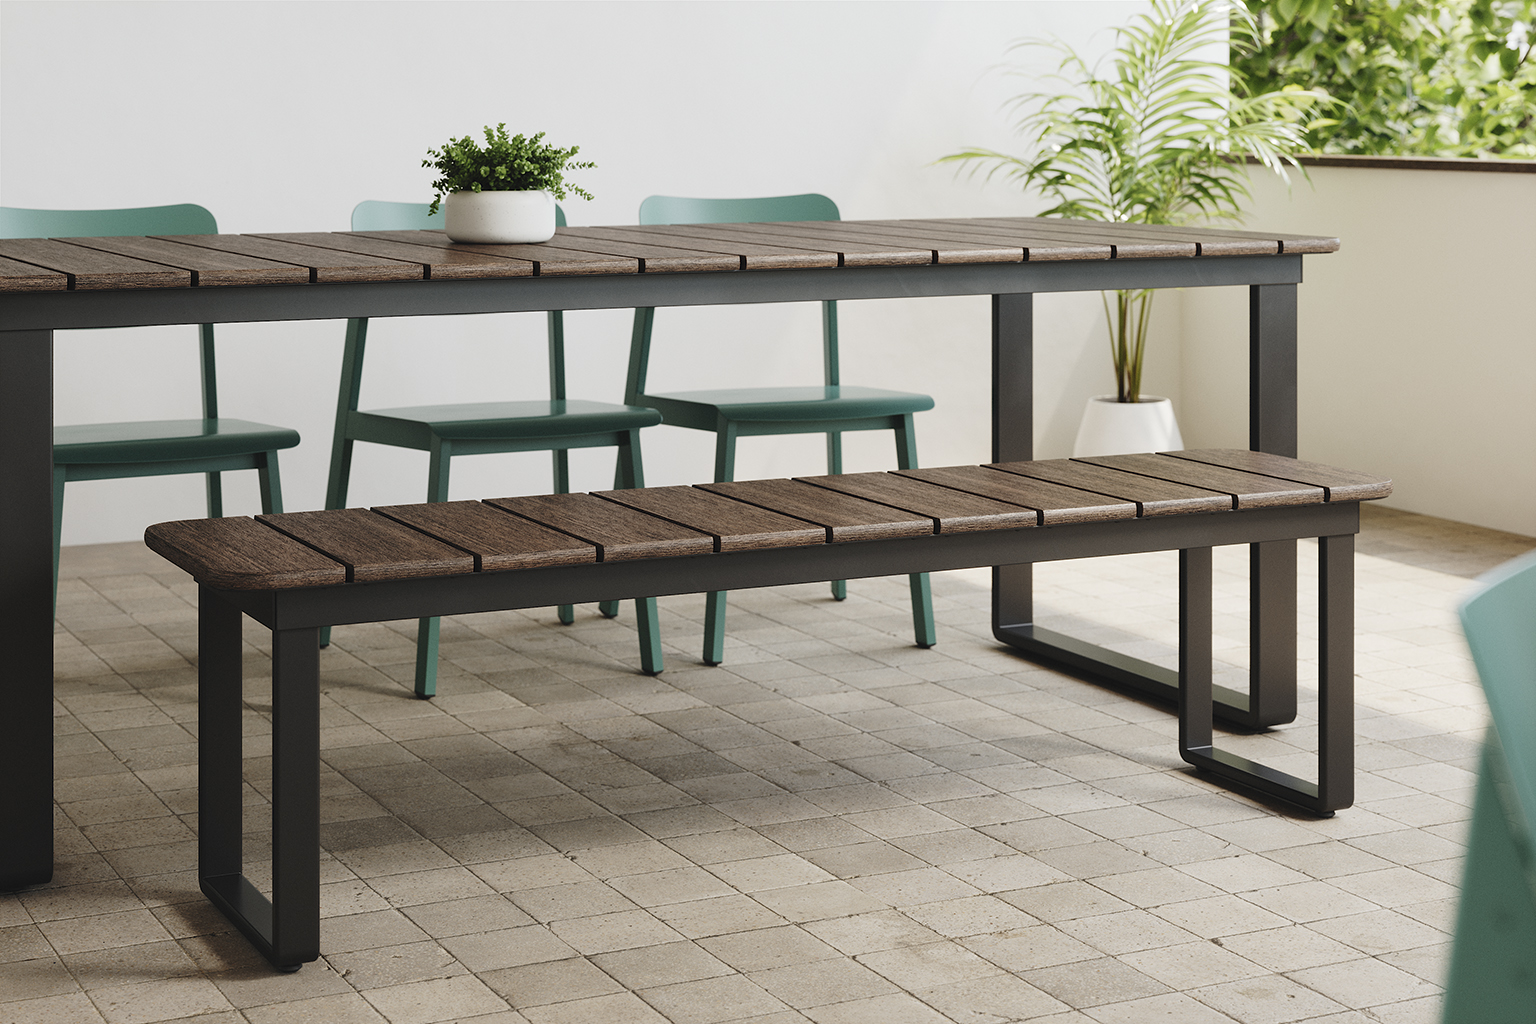 Corporate outdoor space with Bowen Bench.